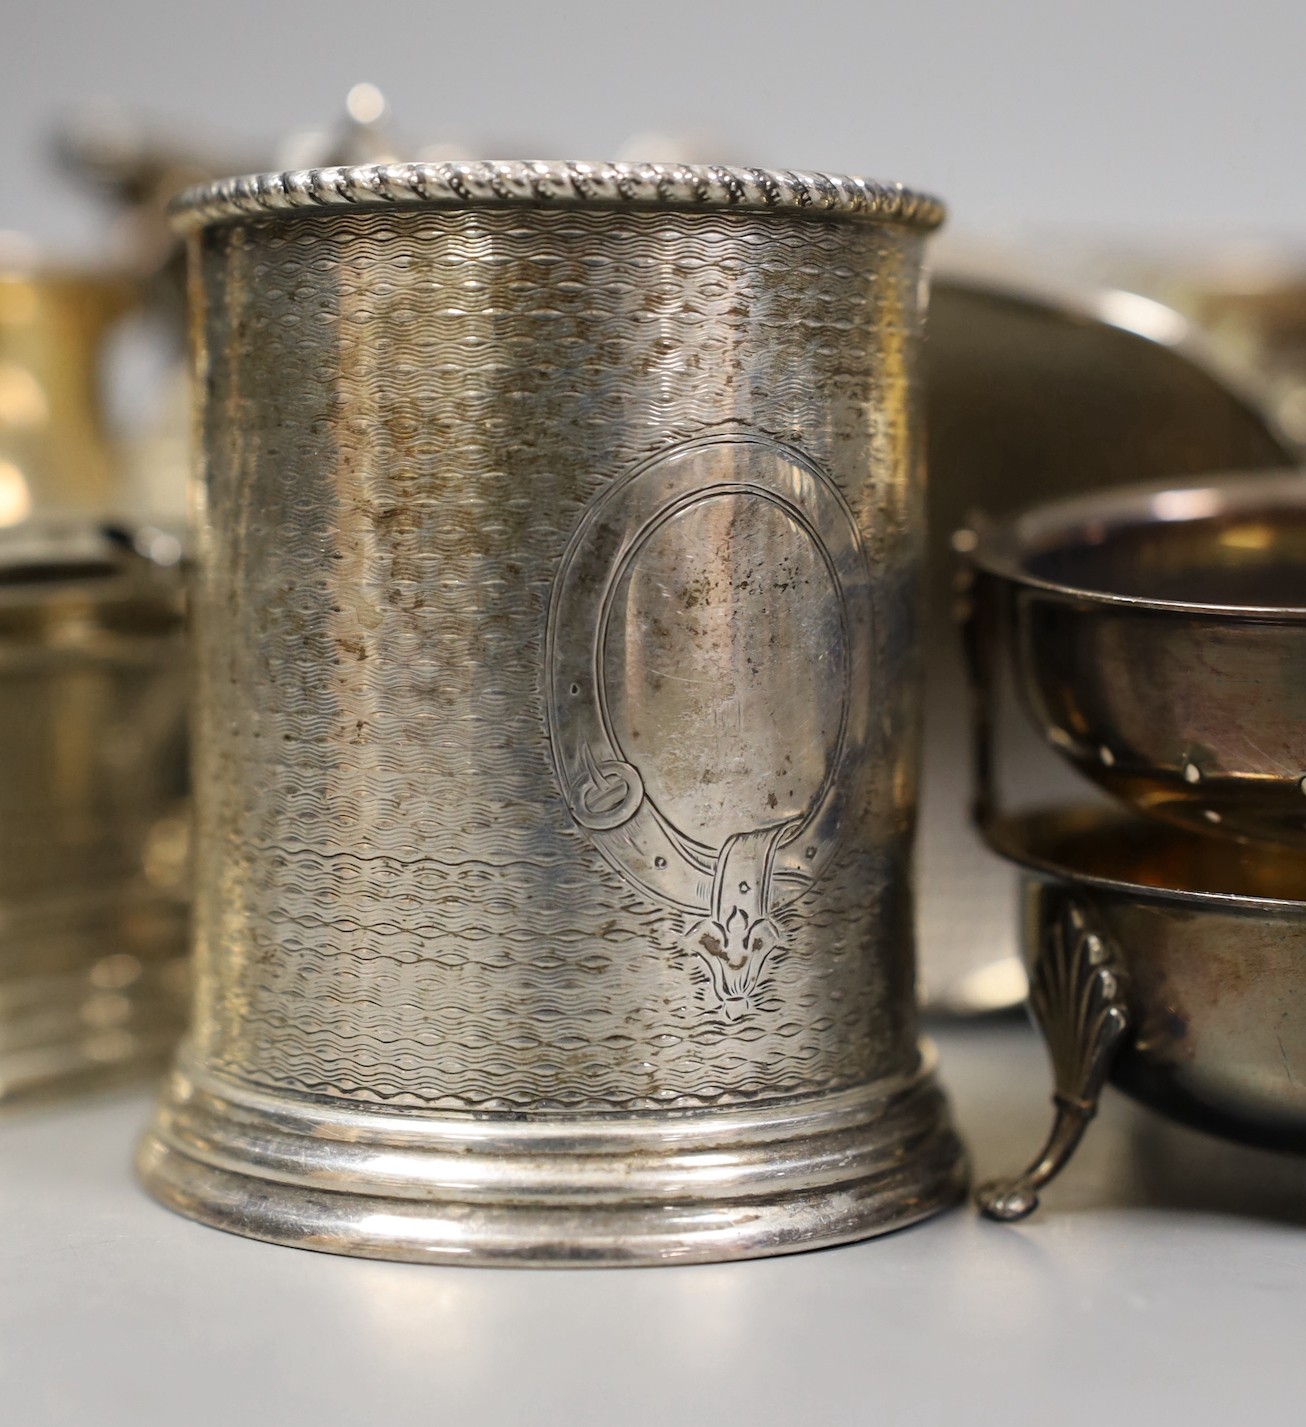 Mixed silver and white metal items including par of toastracks, sugar bowl match sleeve, sauceboat, cream jug, Victorian christening mug, pair of silver mounted clothes brushes, silver mustard silver cigarette case, 25.8